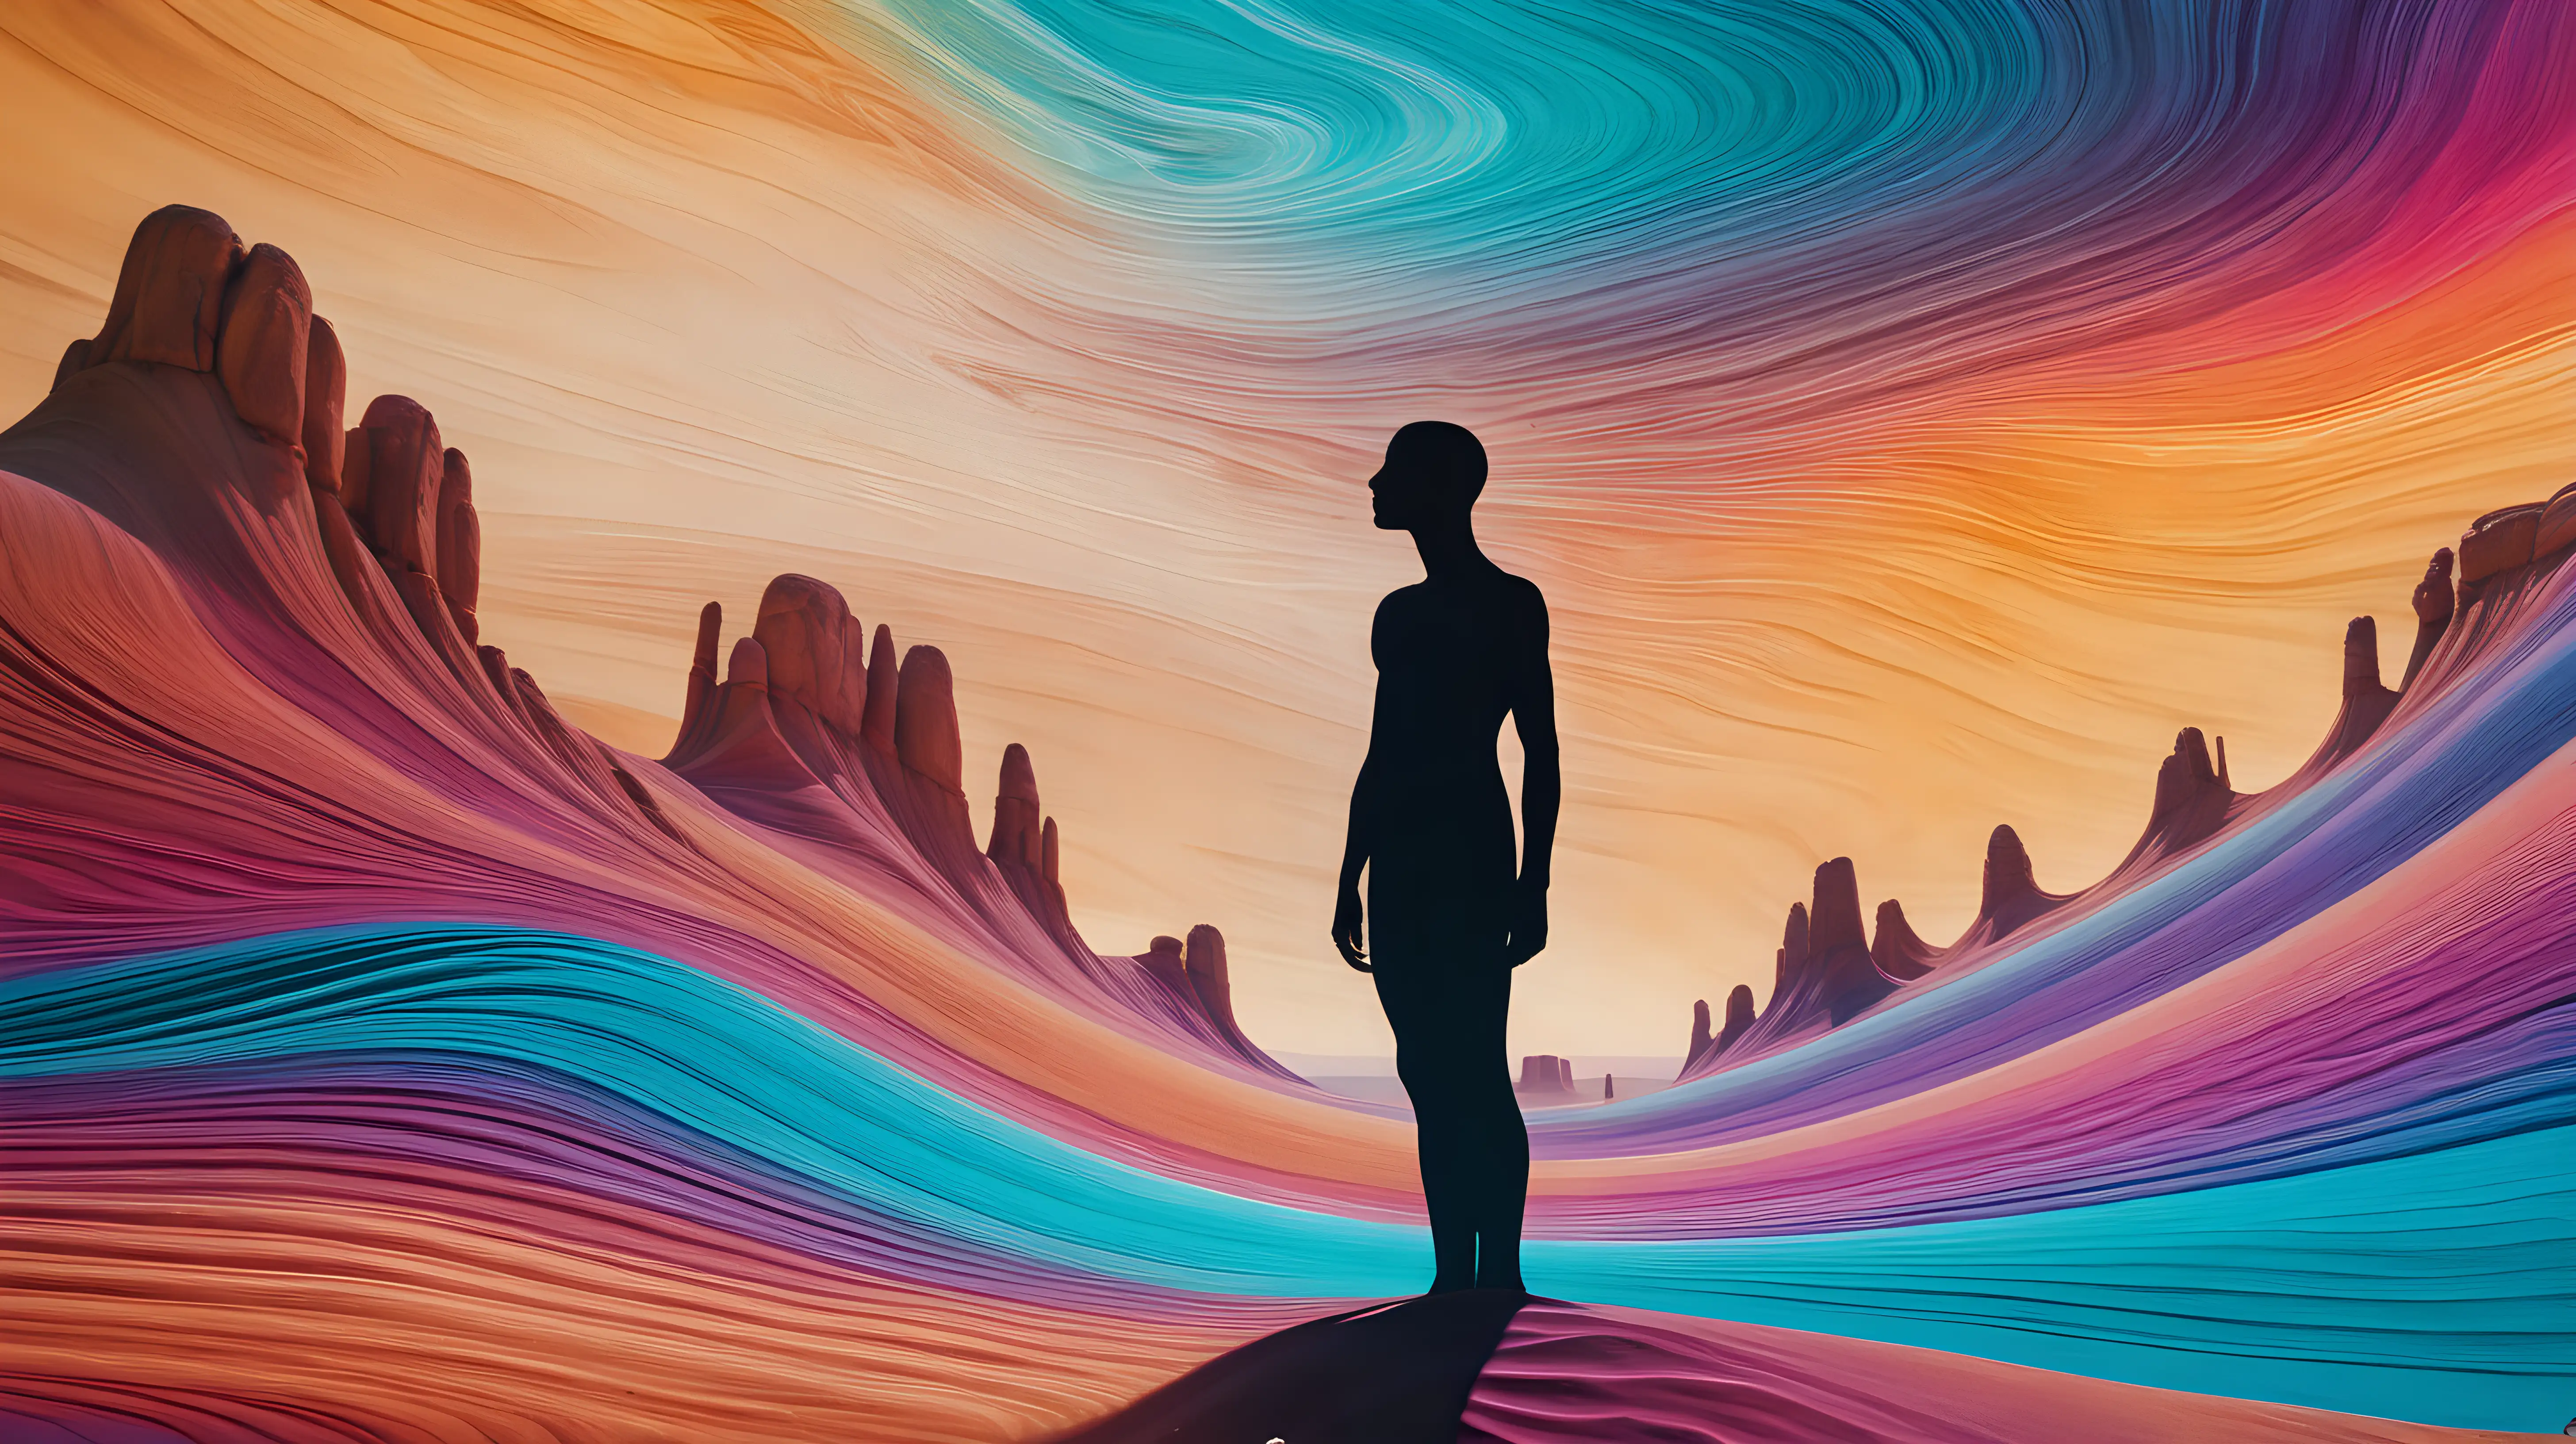 A figure standing in a desert, their silhouette distorted by vibrant, rippling waves of color, creating an otherworldly psychedelic mirage.